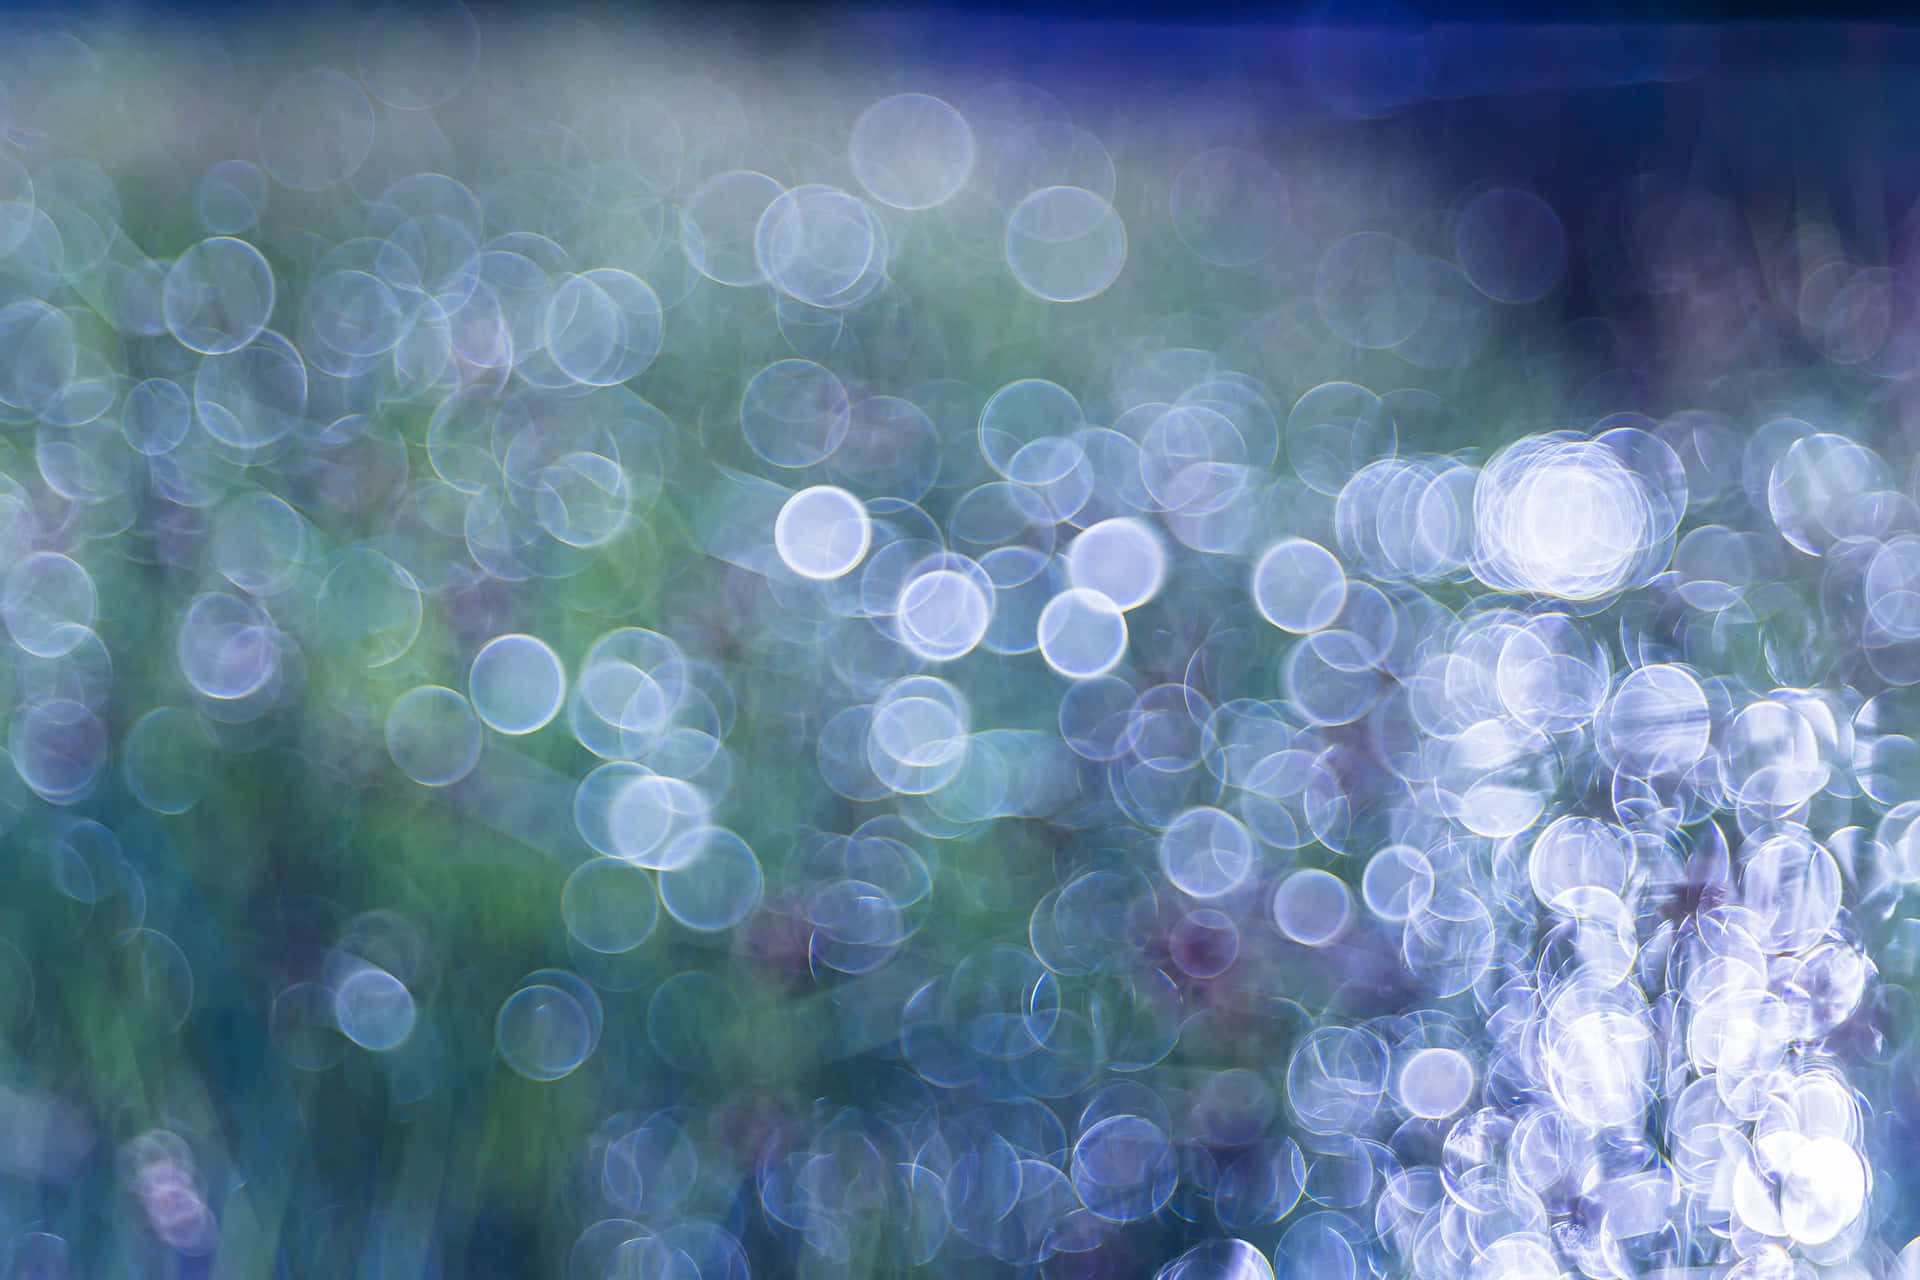 "Bring Depth and Focus to Your Screen with Bokeh"